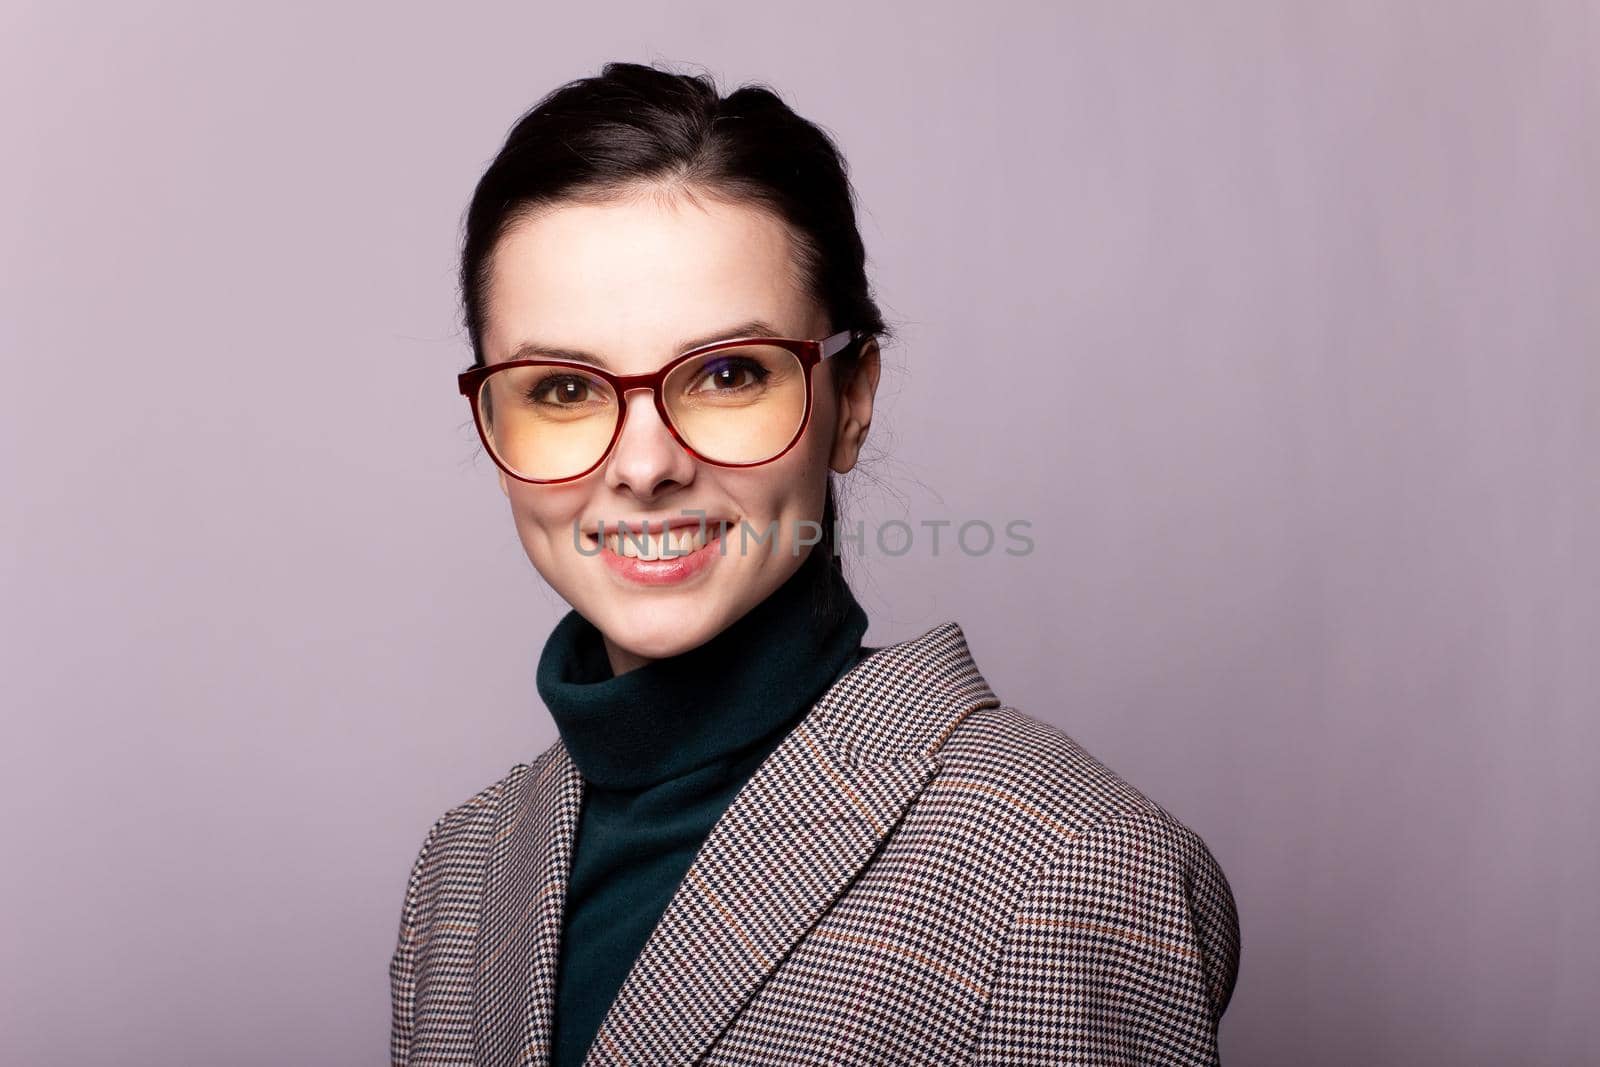 woman in a green turtleneck, jacket, glasses, portrait on a gray background. High quality photo